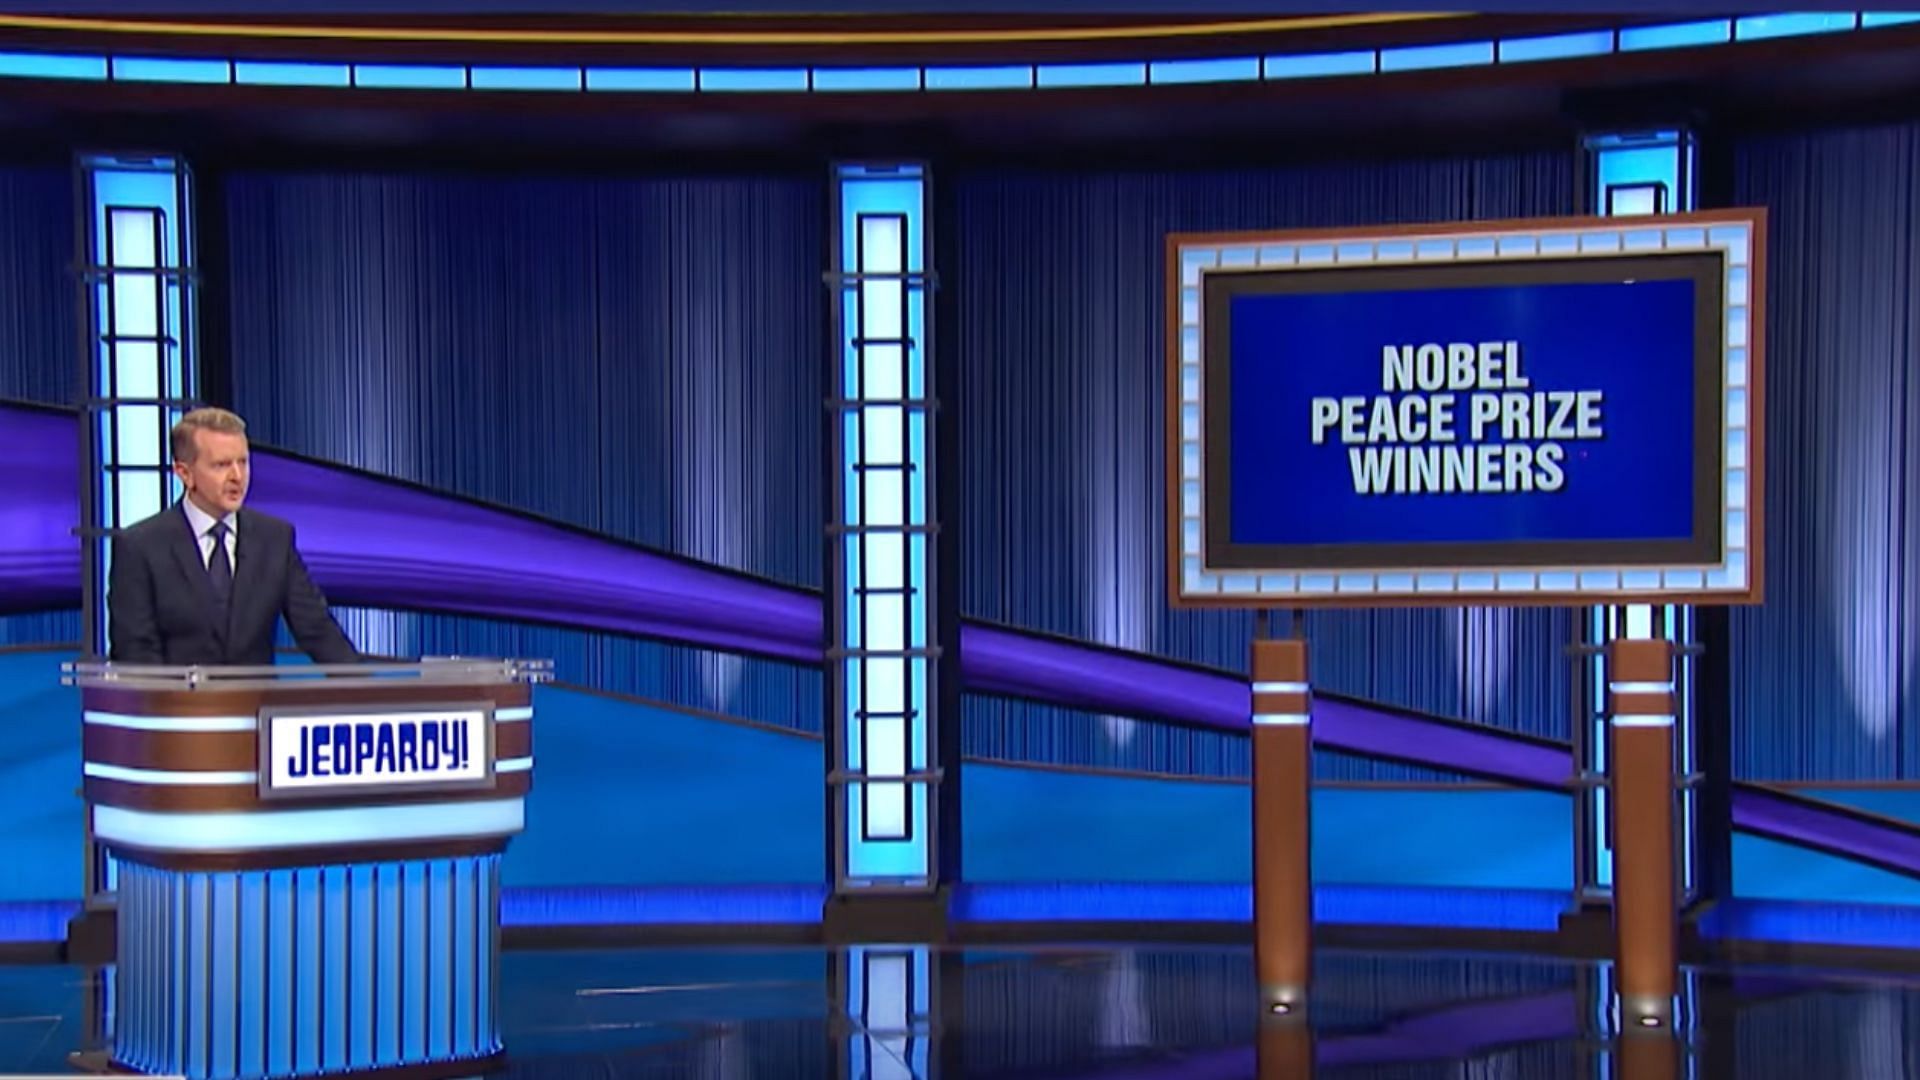 Jeopardy! airs from Monday to Friday